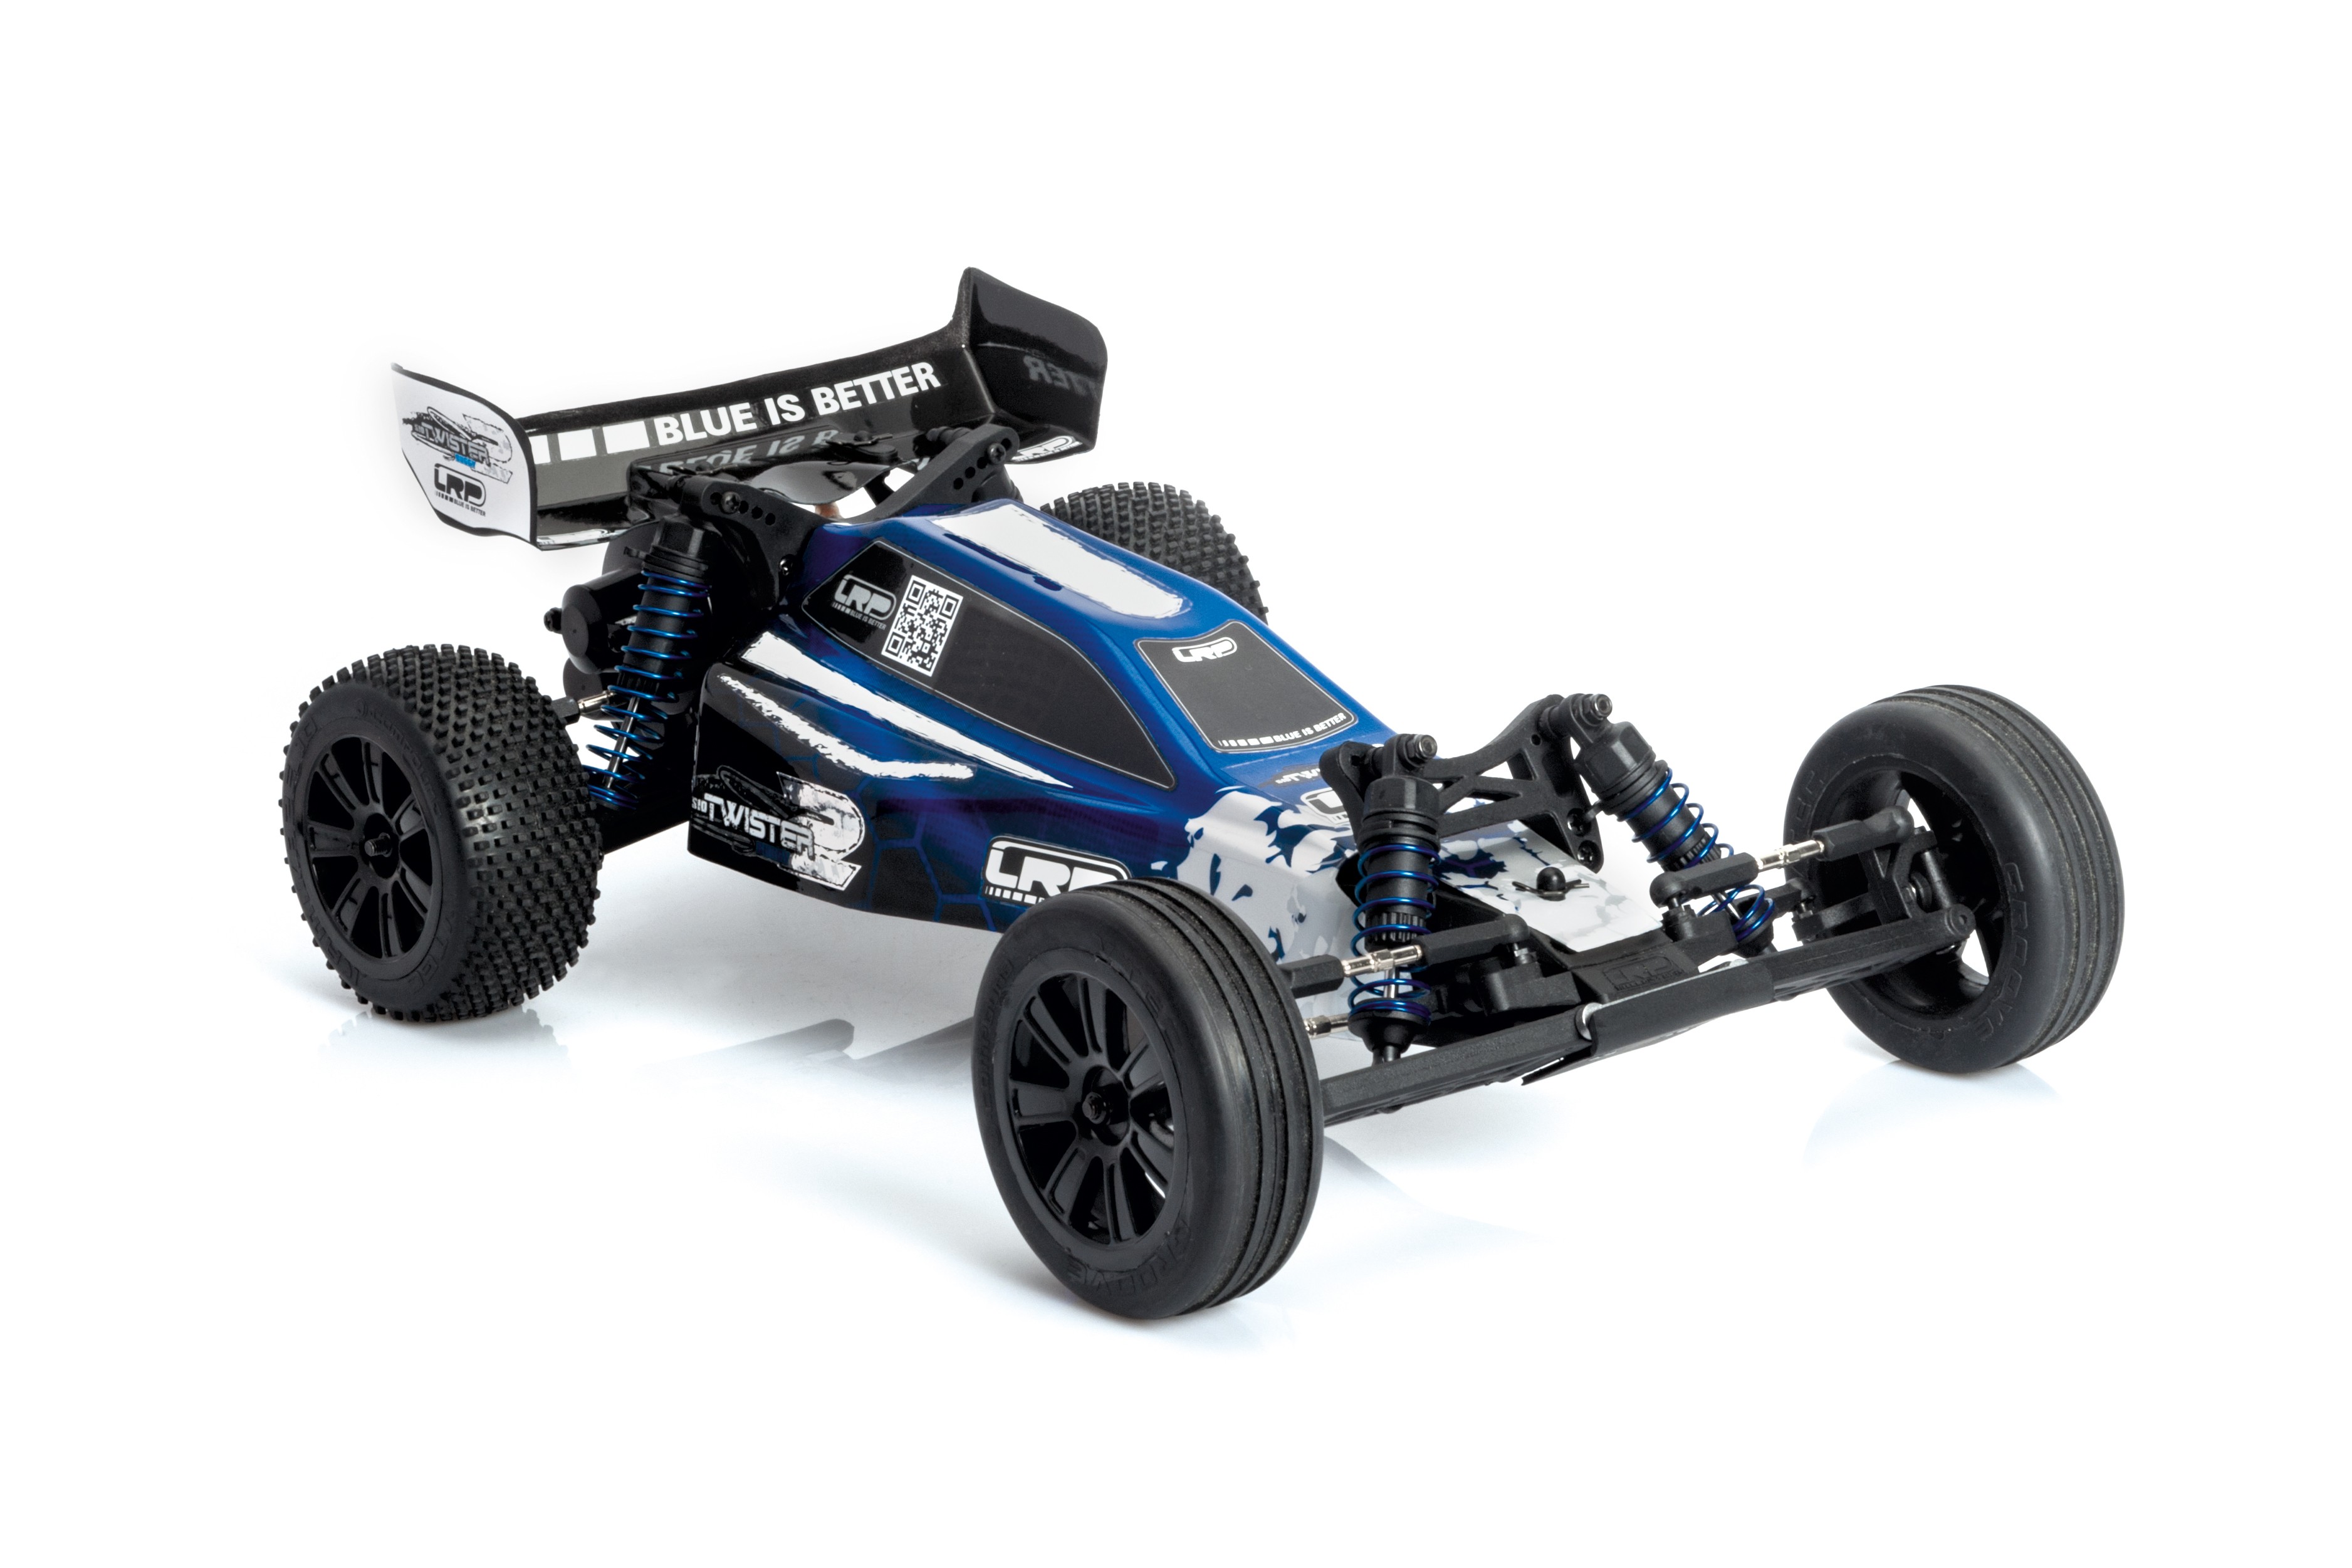 LRP - S10 Twister 2 Buggy Brushless 2.4ghz Rtr - 1/10 Electric 2wd Buggy - 120312